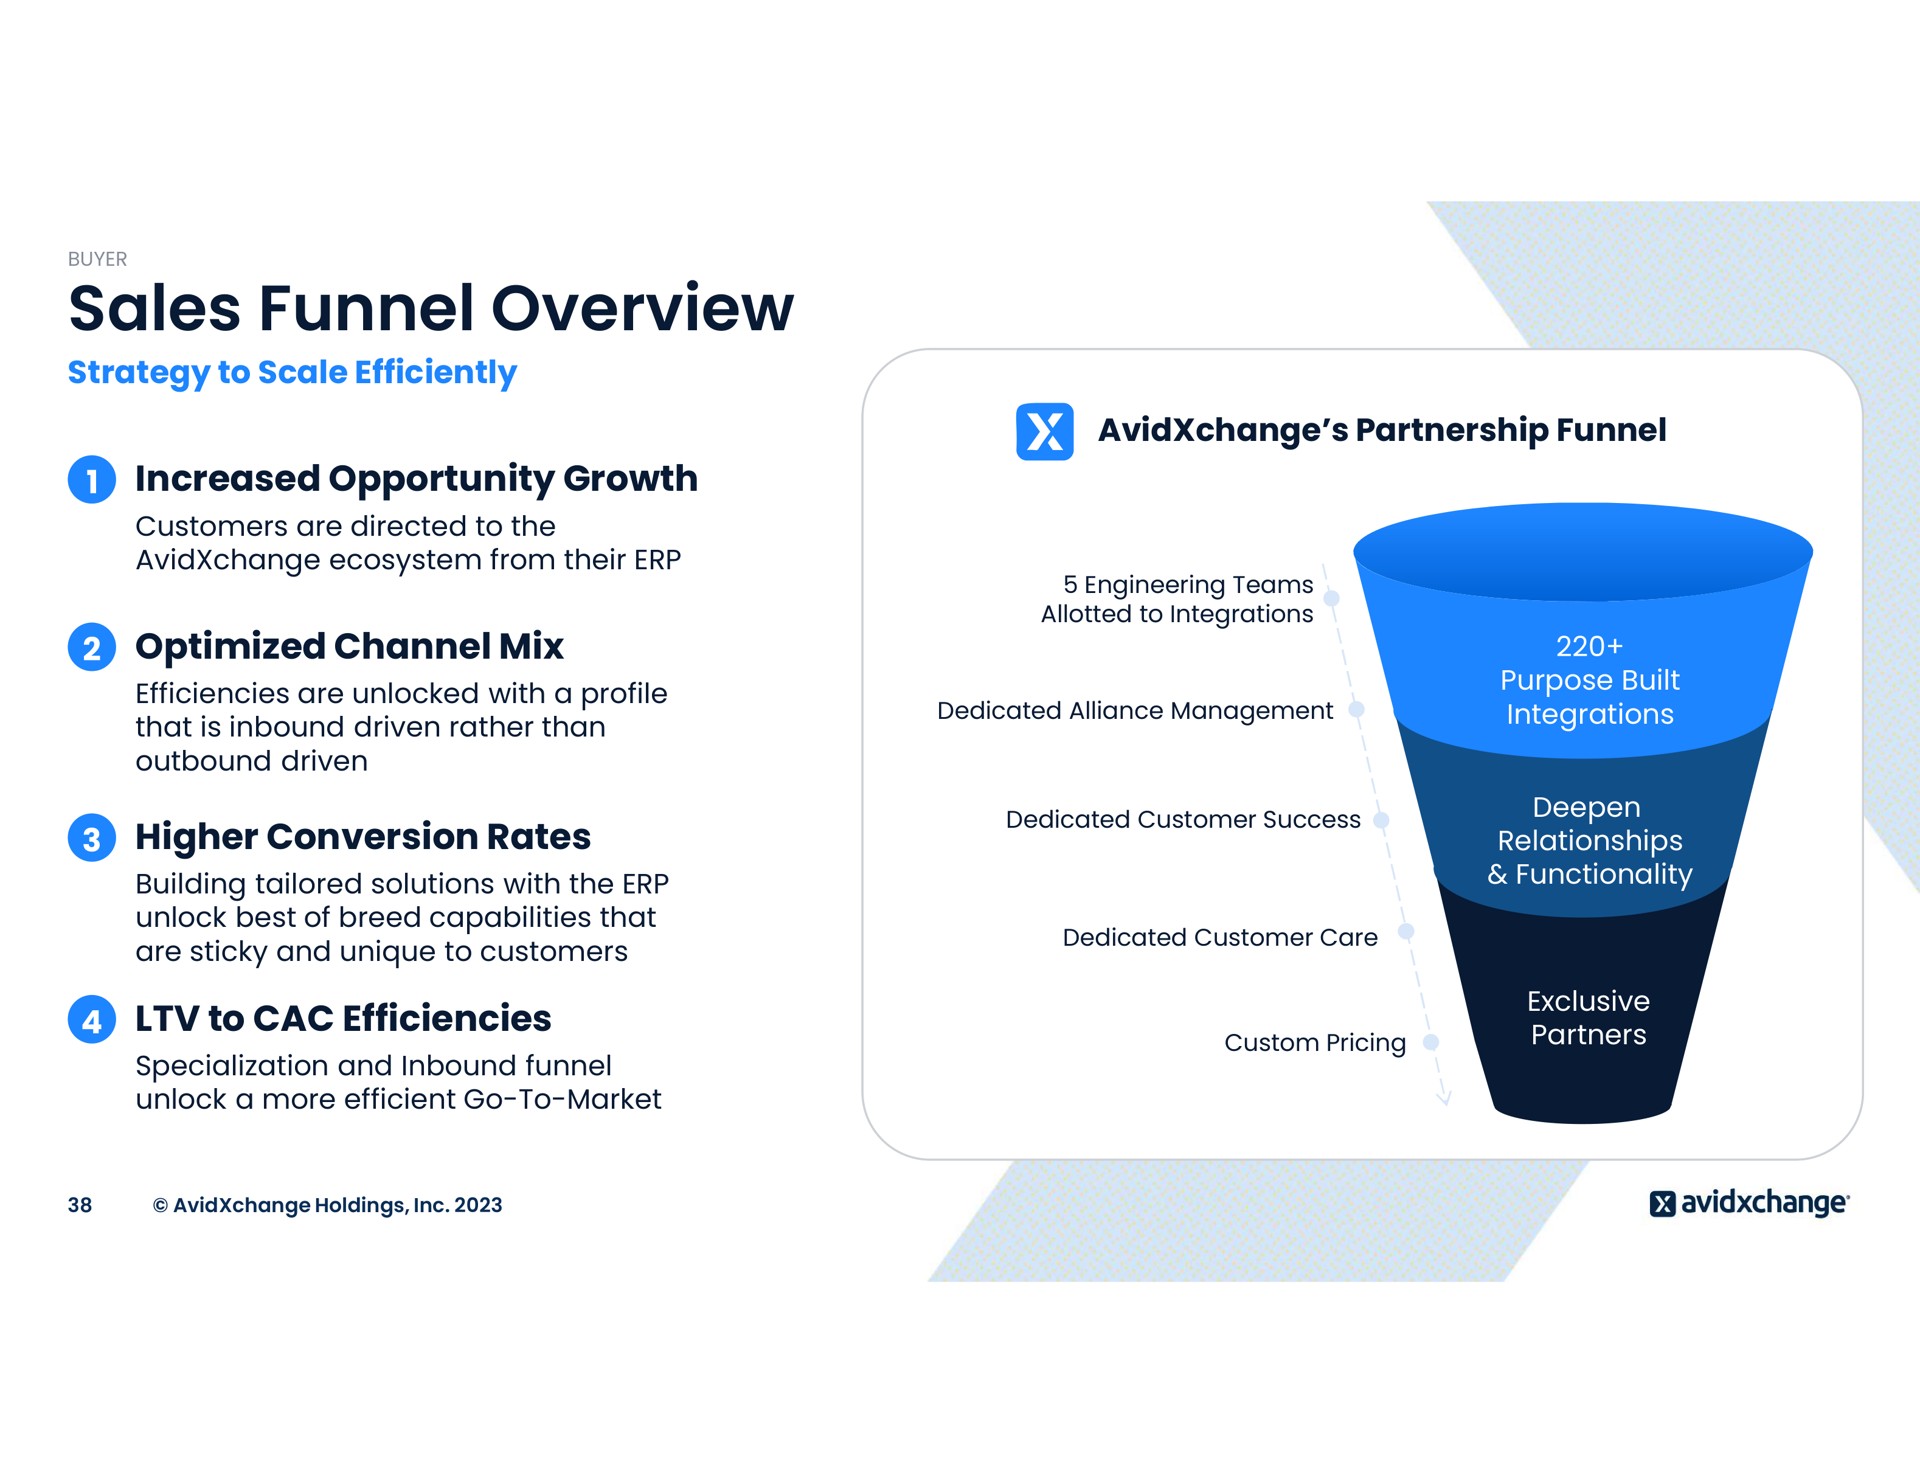 sales funnel overview increased opportunity growth optimized channel mix higher conversion rates efficiencies | AvidXchange